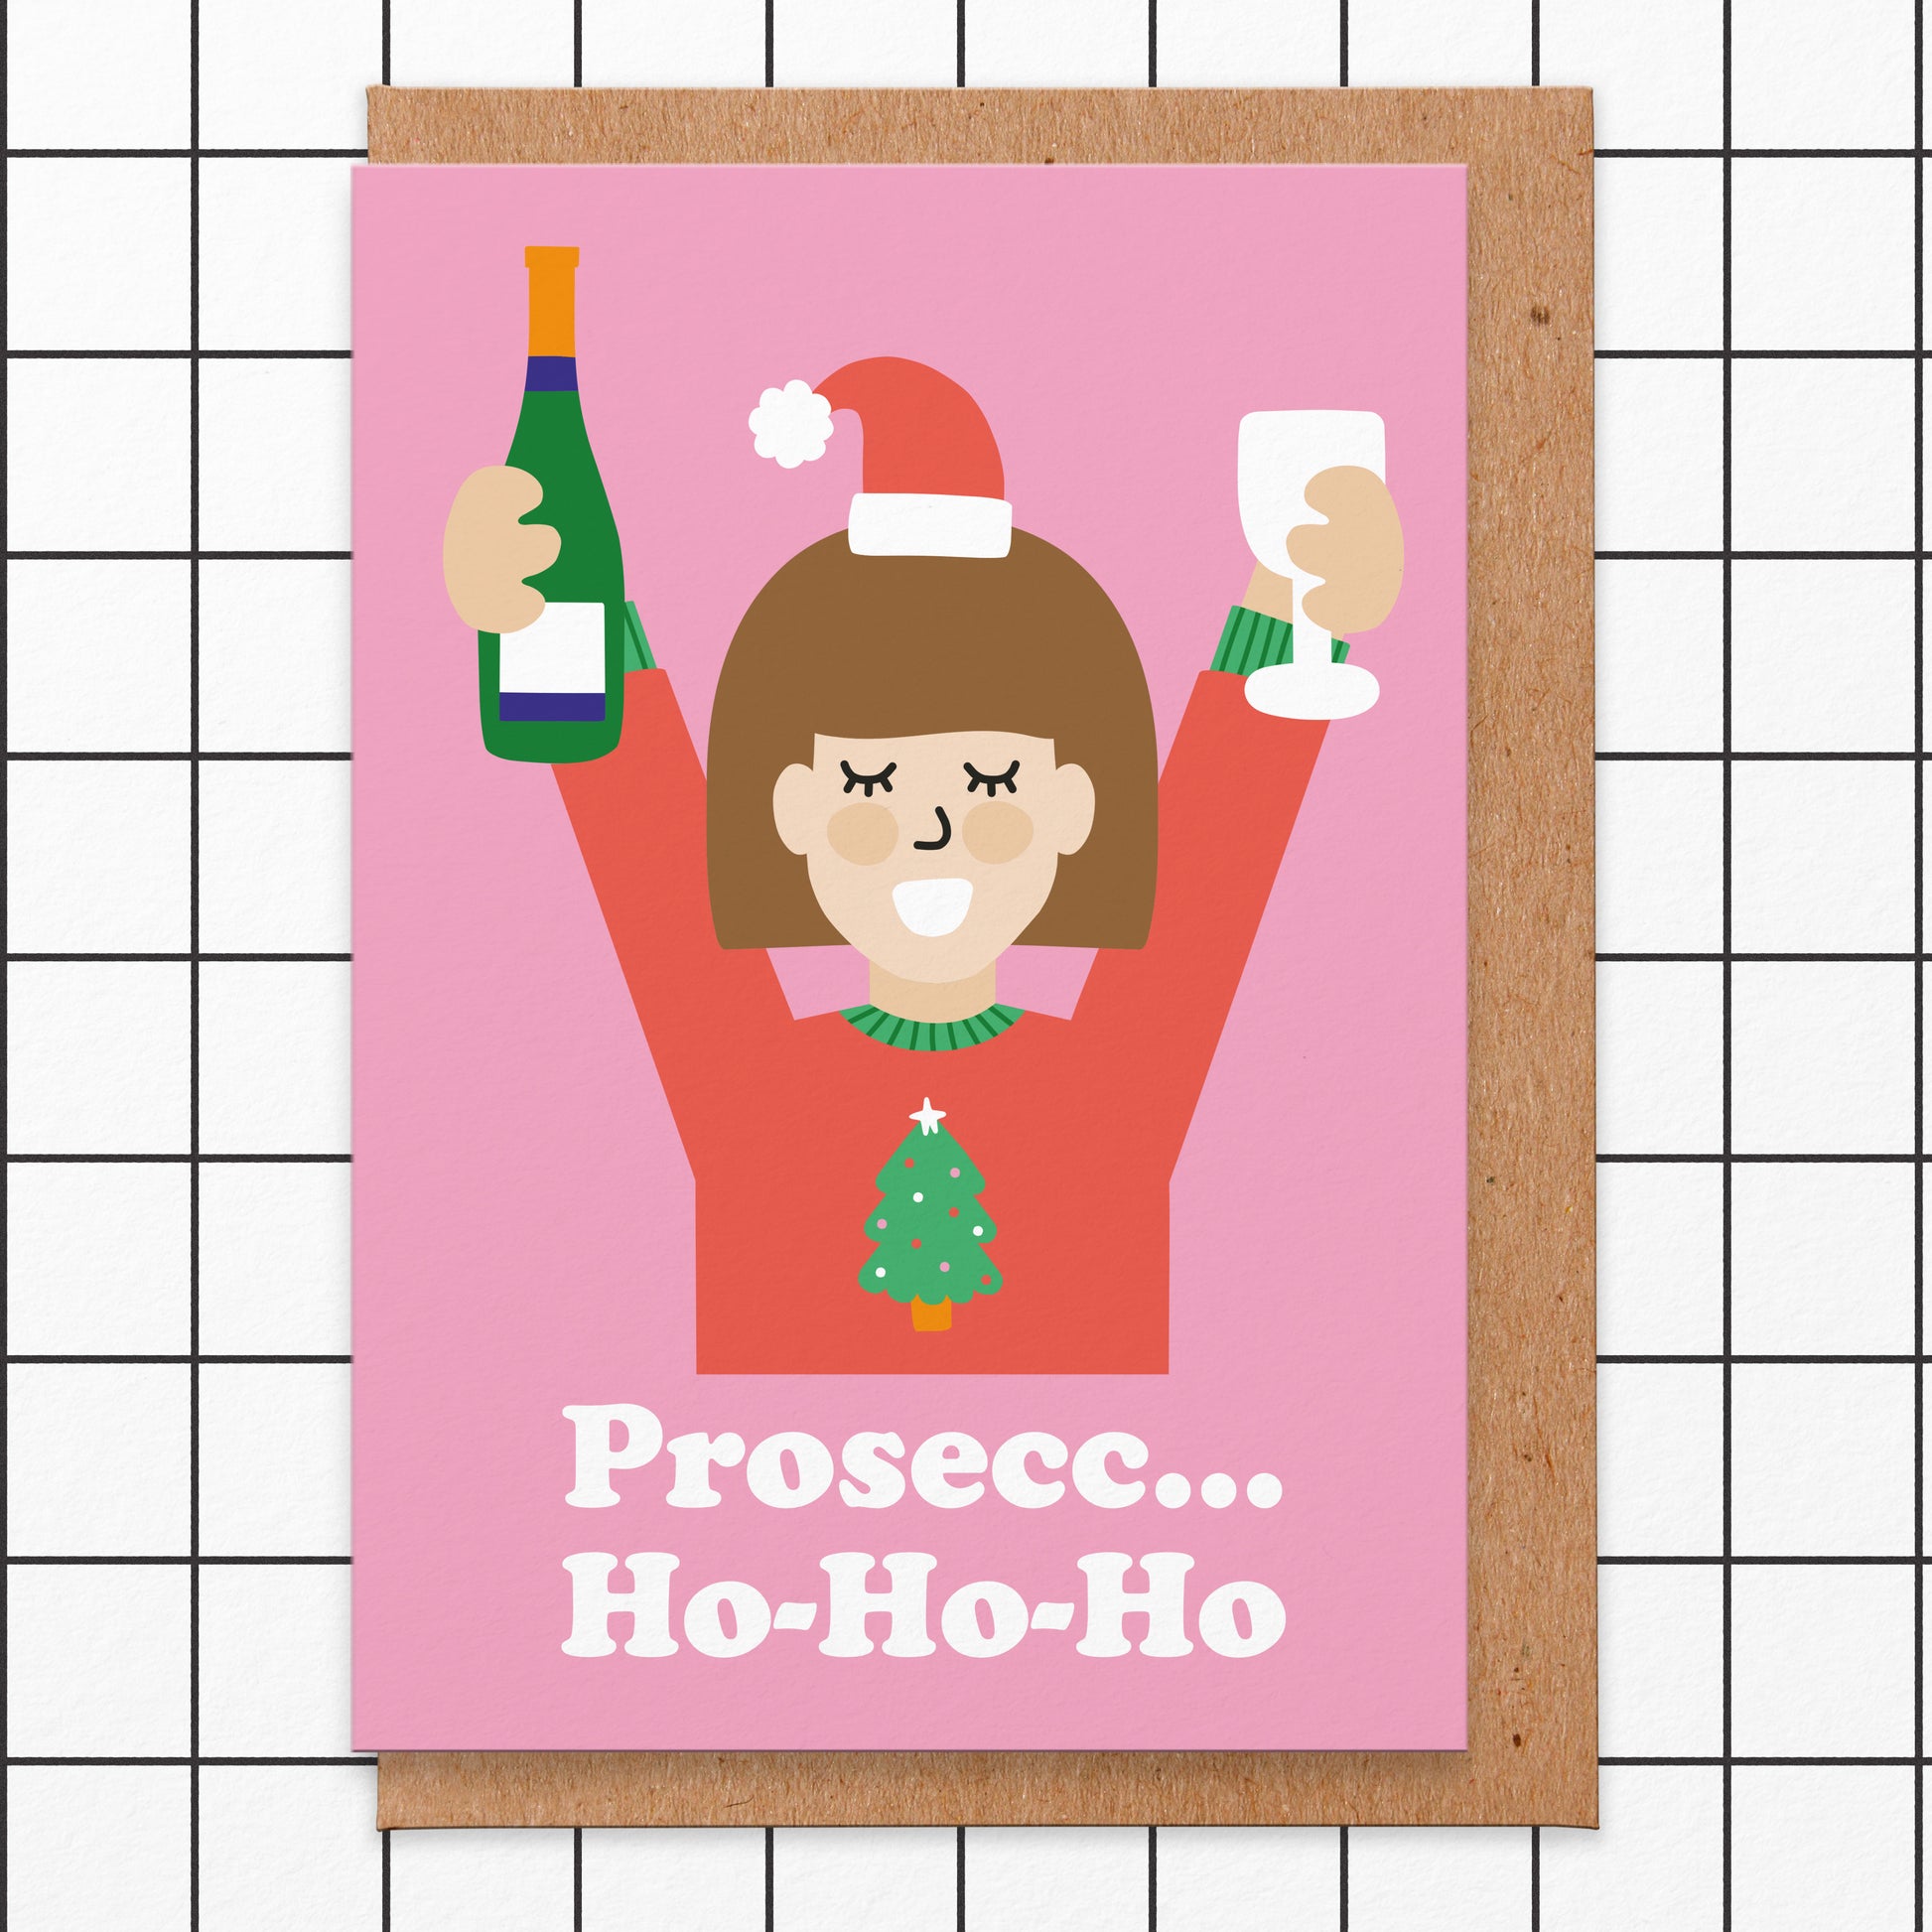 Christmas card with an illustration of a lady wearing a christmas jumper holding her arms up in the air with a bottle of Prosecco in one hand and a glass in the other. The card reads prosecc... ho-ho-ho.